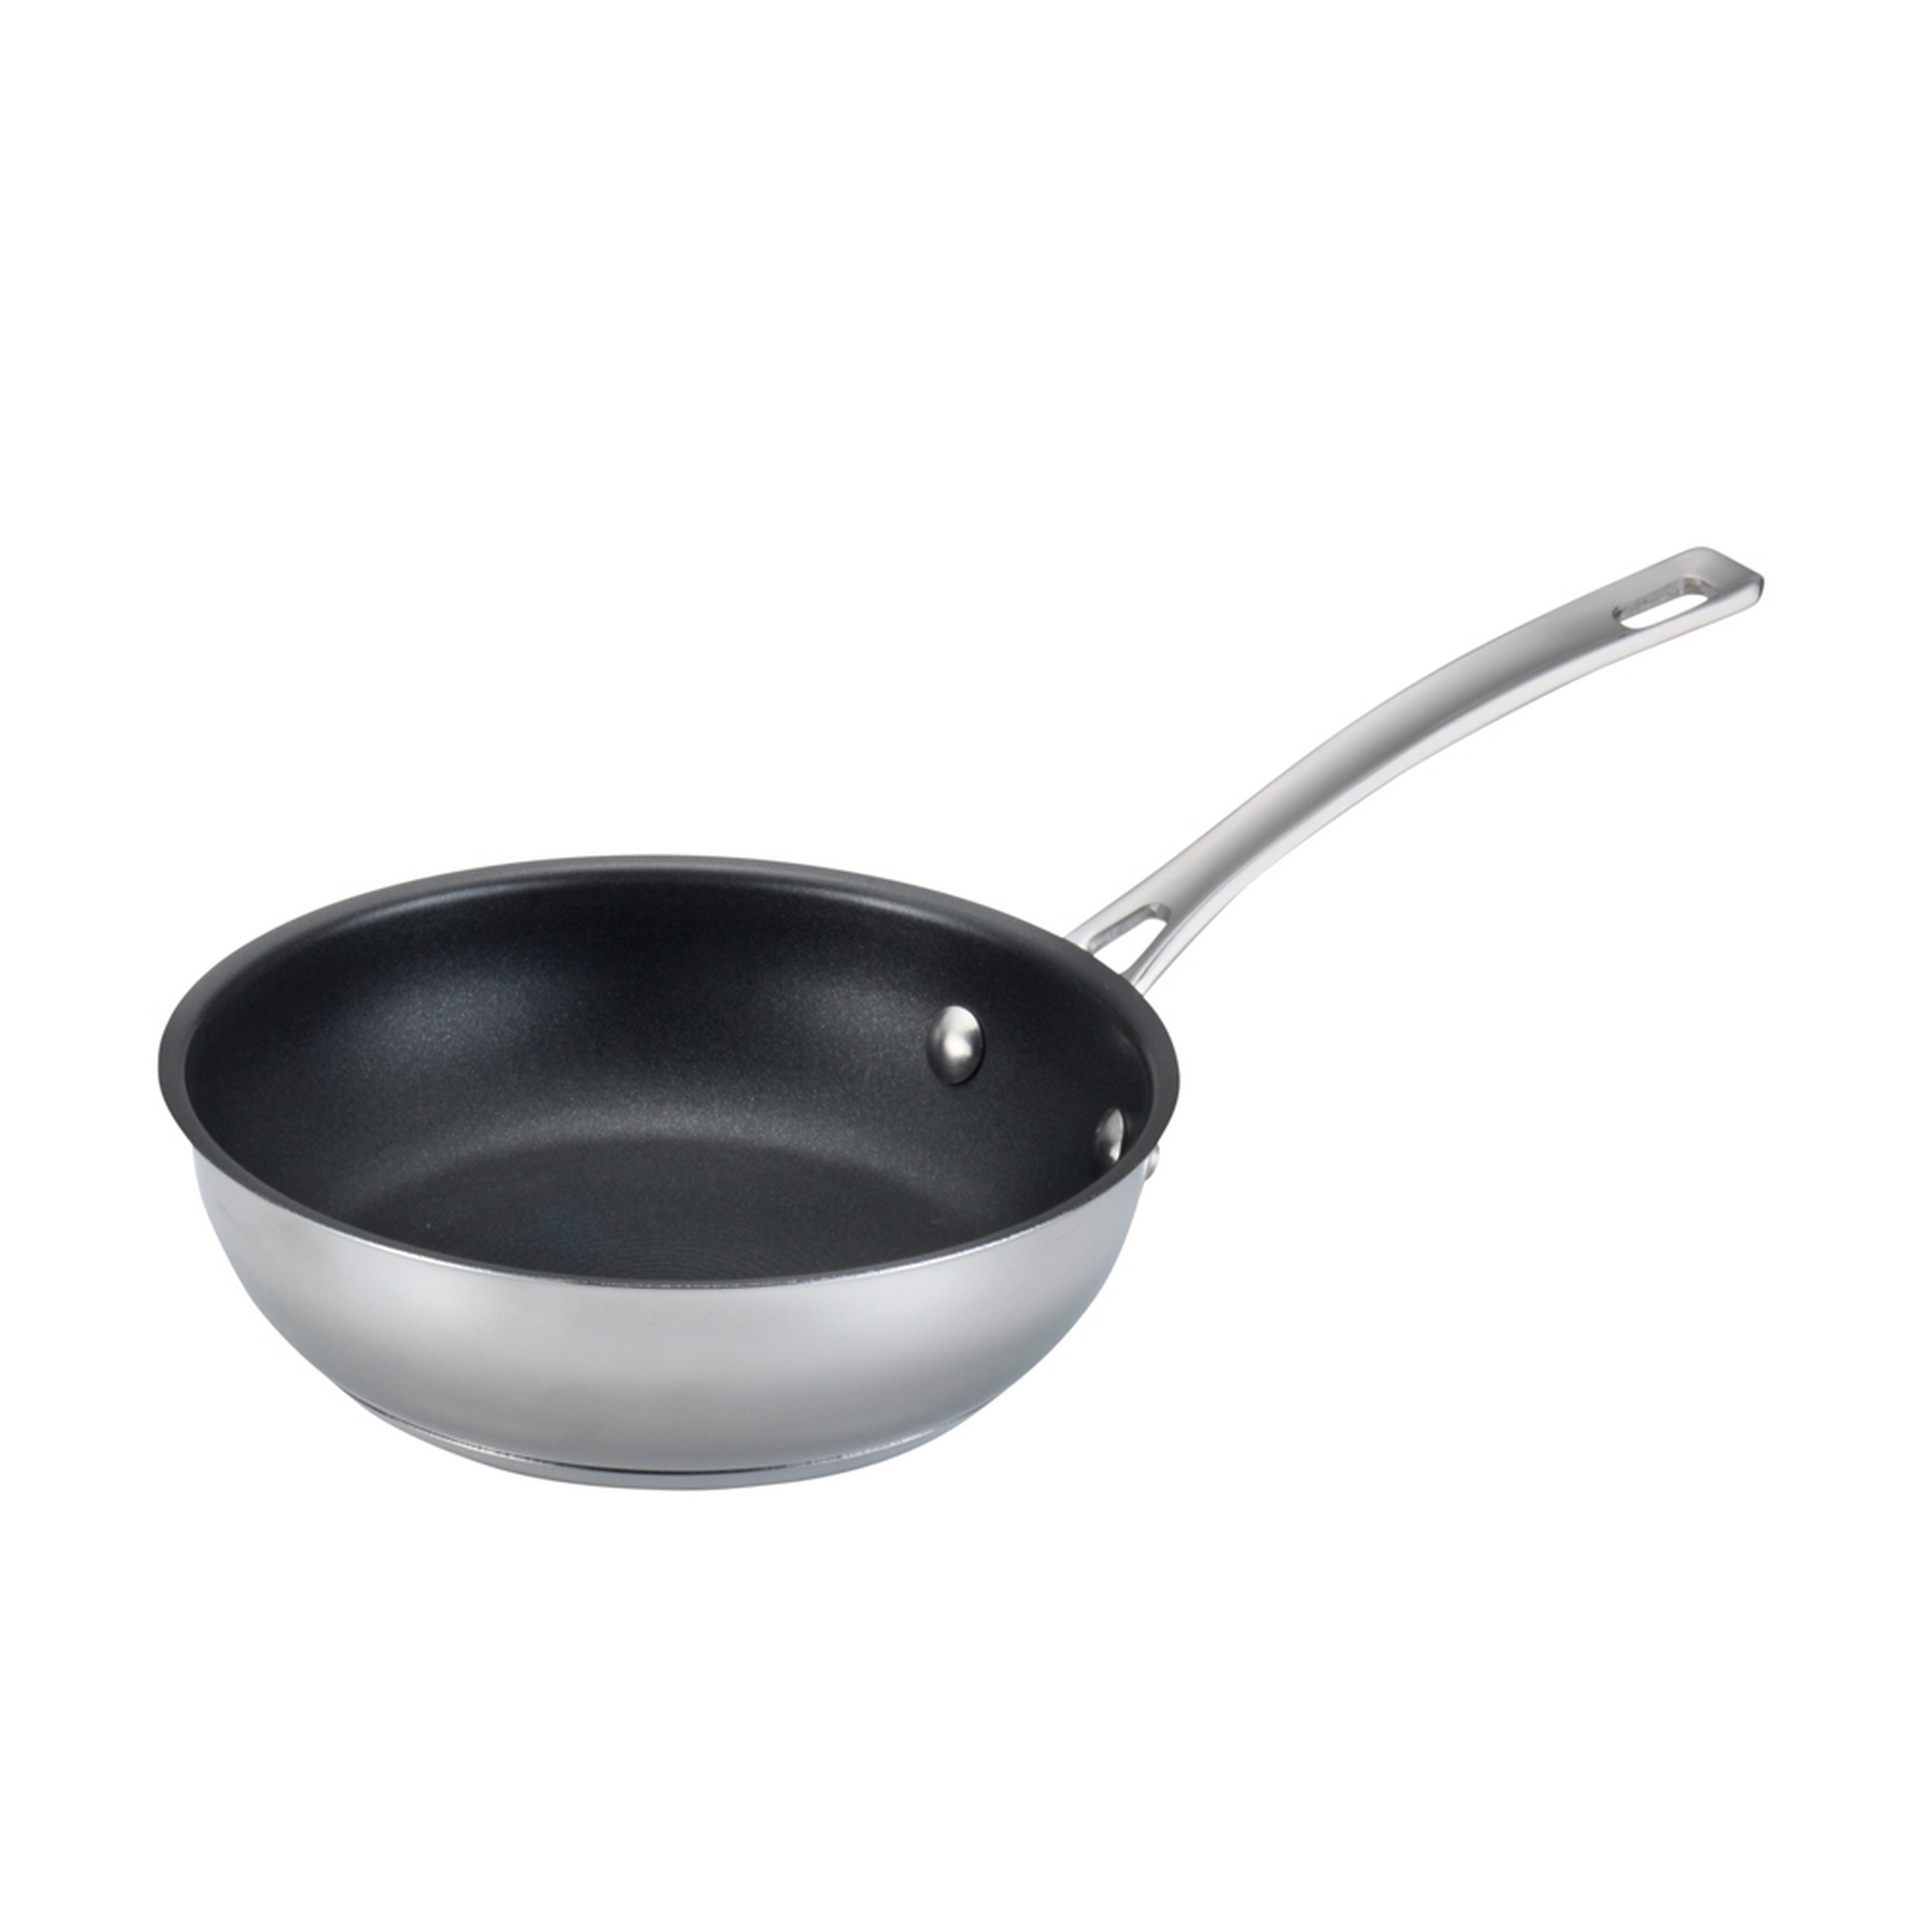 https://ak1.ostkcdn.com/images/products/9206721/Circulon-Genesis-Stainless-Steel-Nonstick-8.5-Inch-French-Skillet-4f6f3123-3a7f-4b0f-a6a1-9f7bc6288714.jpg